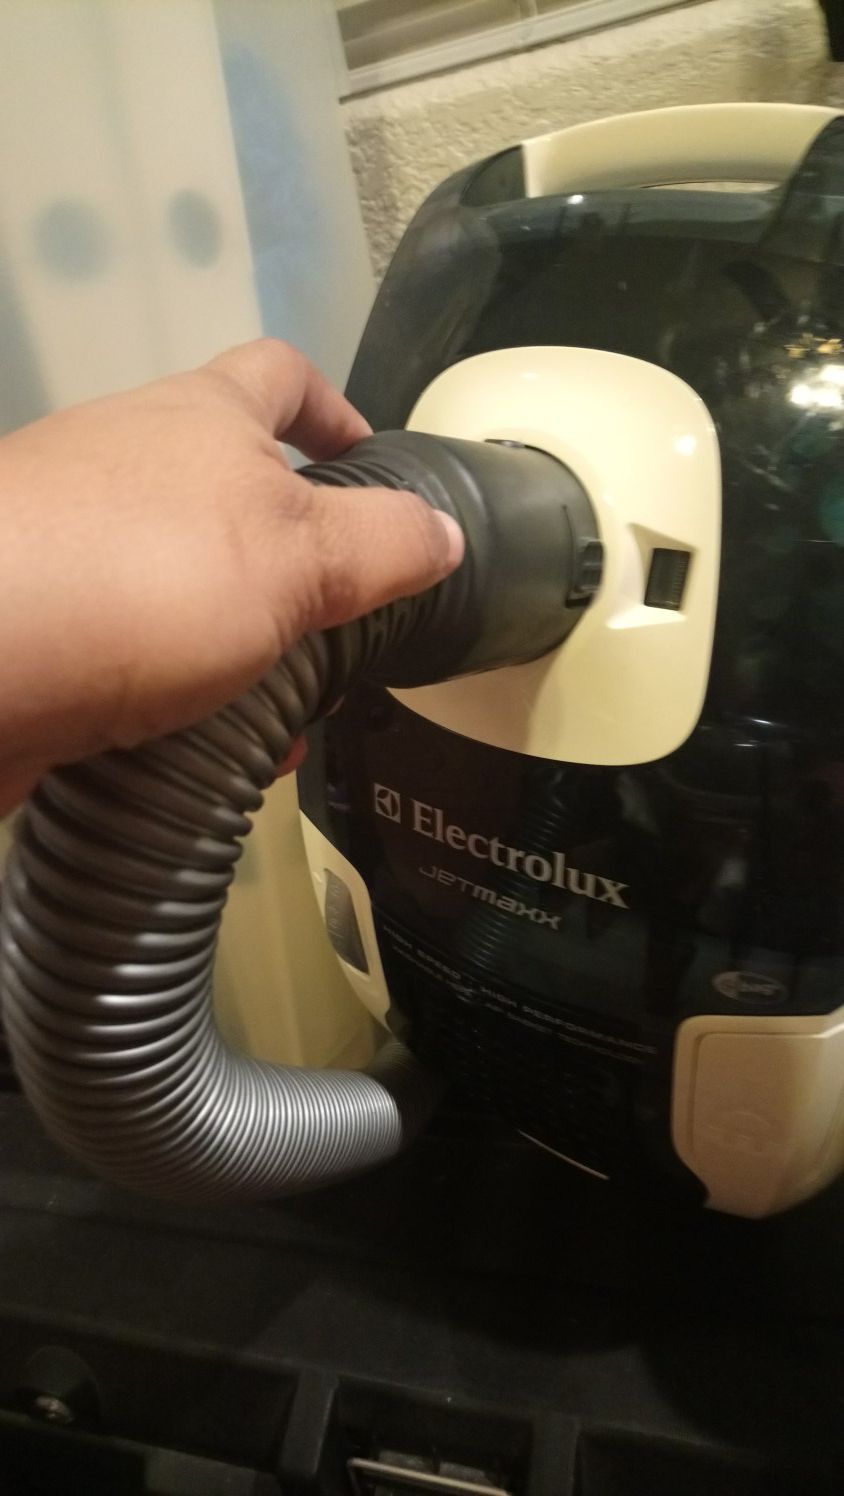 Electrolux canister vacuum cleaner